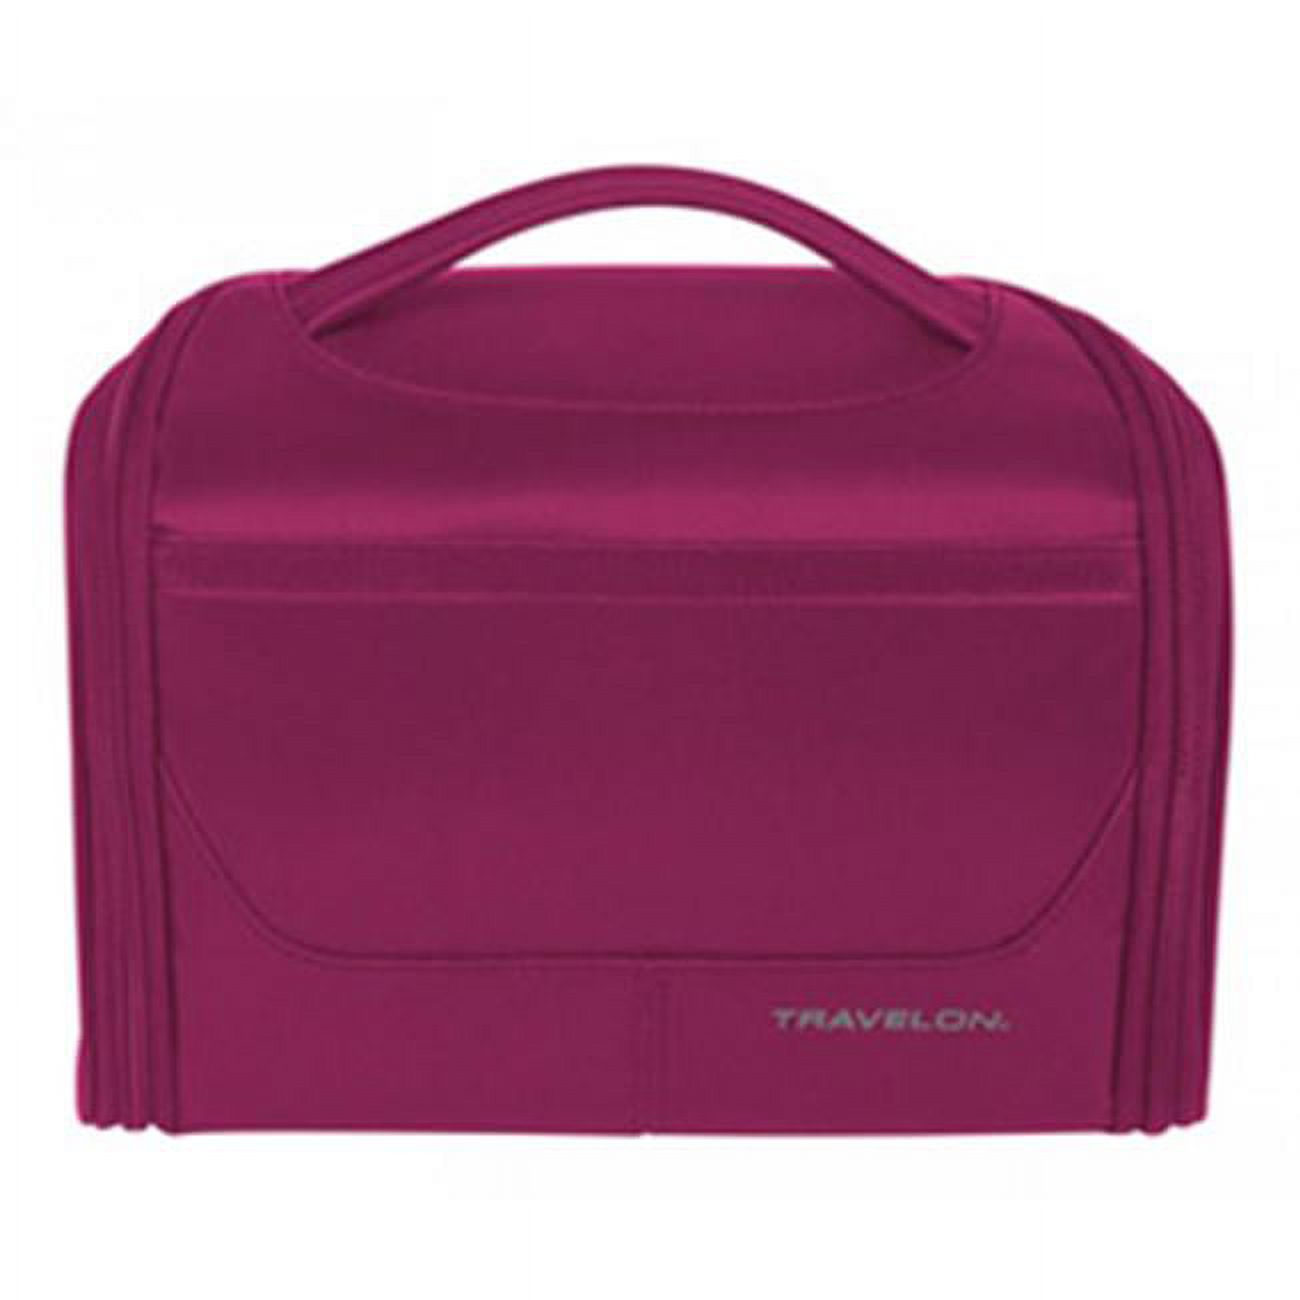 Travelon Weekend Edition Independence Bag, Berry - image 1 of 4